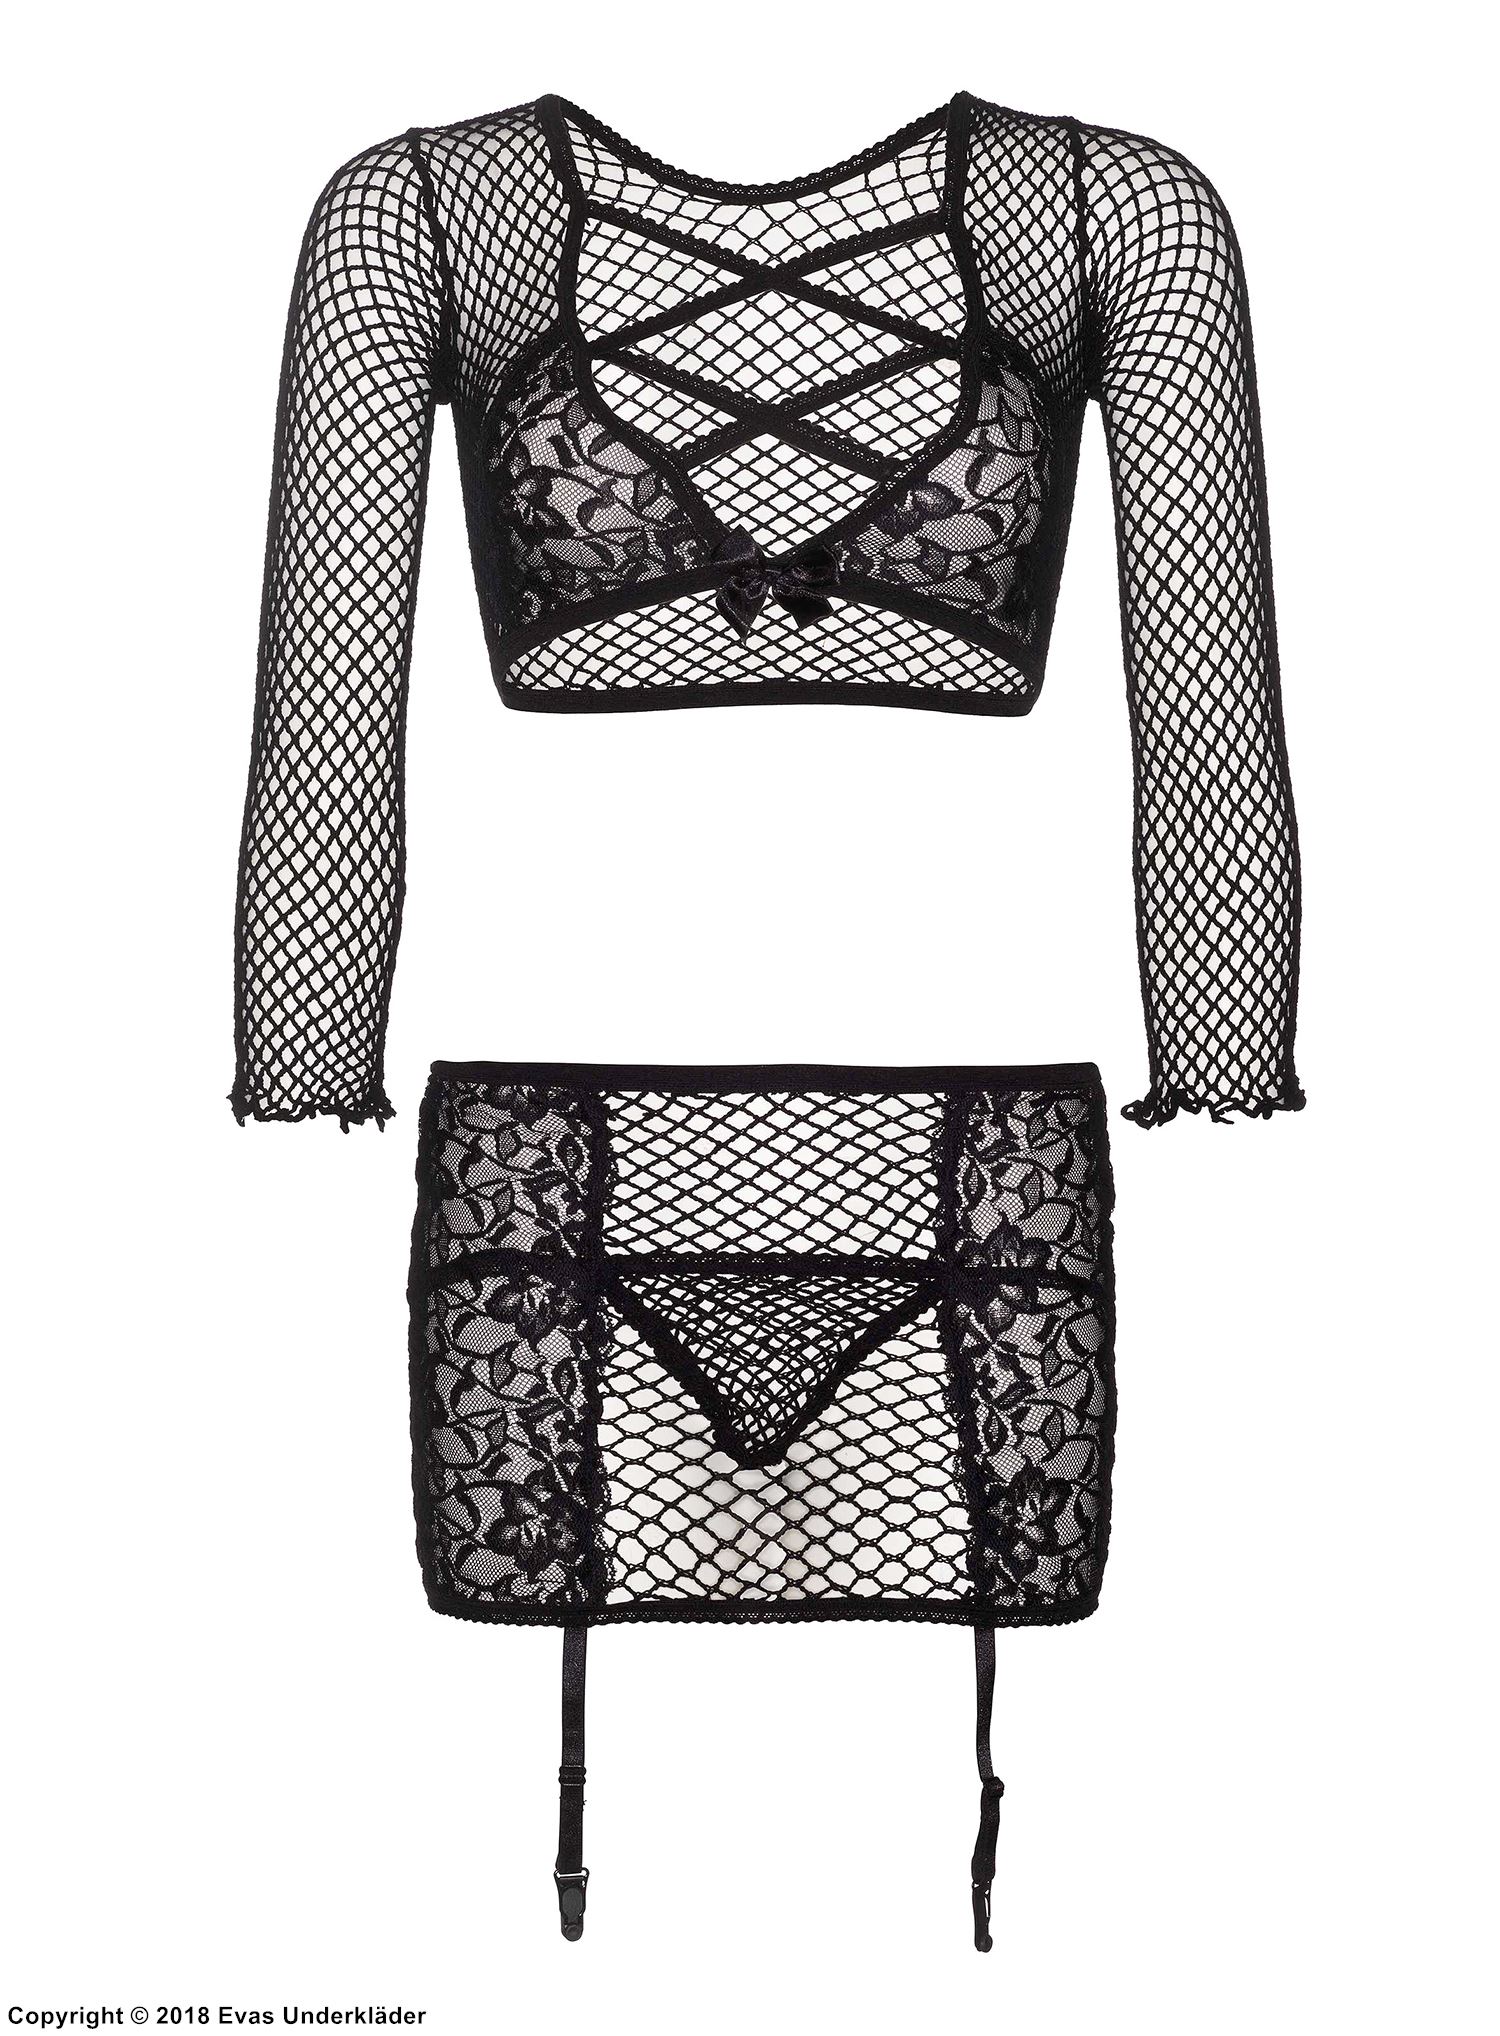 Sexy lingerie set, large fishnet, long sleeves, crossing straps